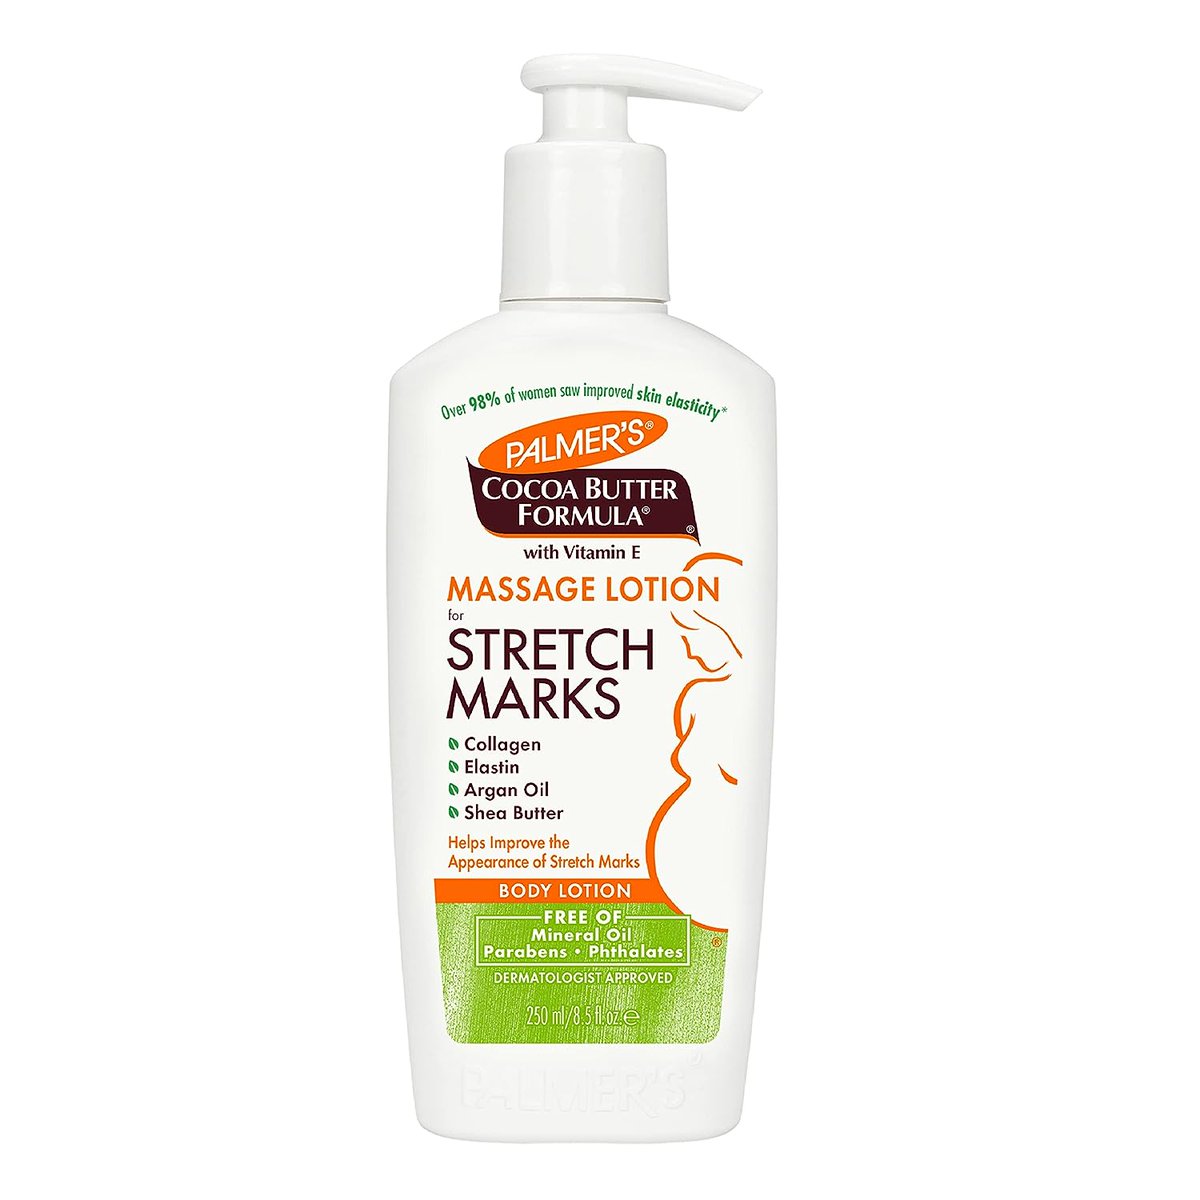 #stretch #stretchmark #pregnancy #vitamins #HealthTips #TeamJamaica Stretch Mark Lotion This non greasy lotion is ideal for allover body use to improve skin elasticity, texture and tone and is widely recommended for stretch marks during and after pregnancy or weight fluctuation#